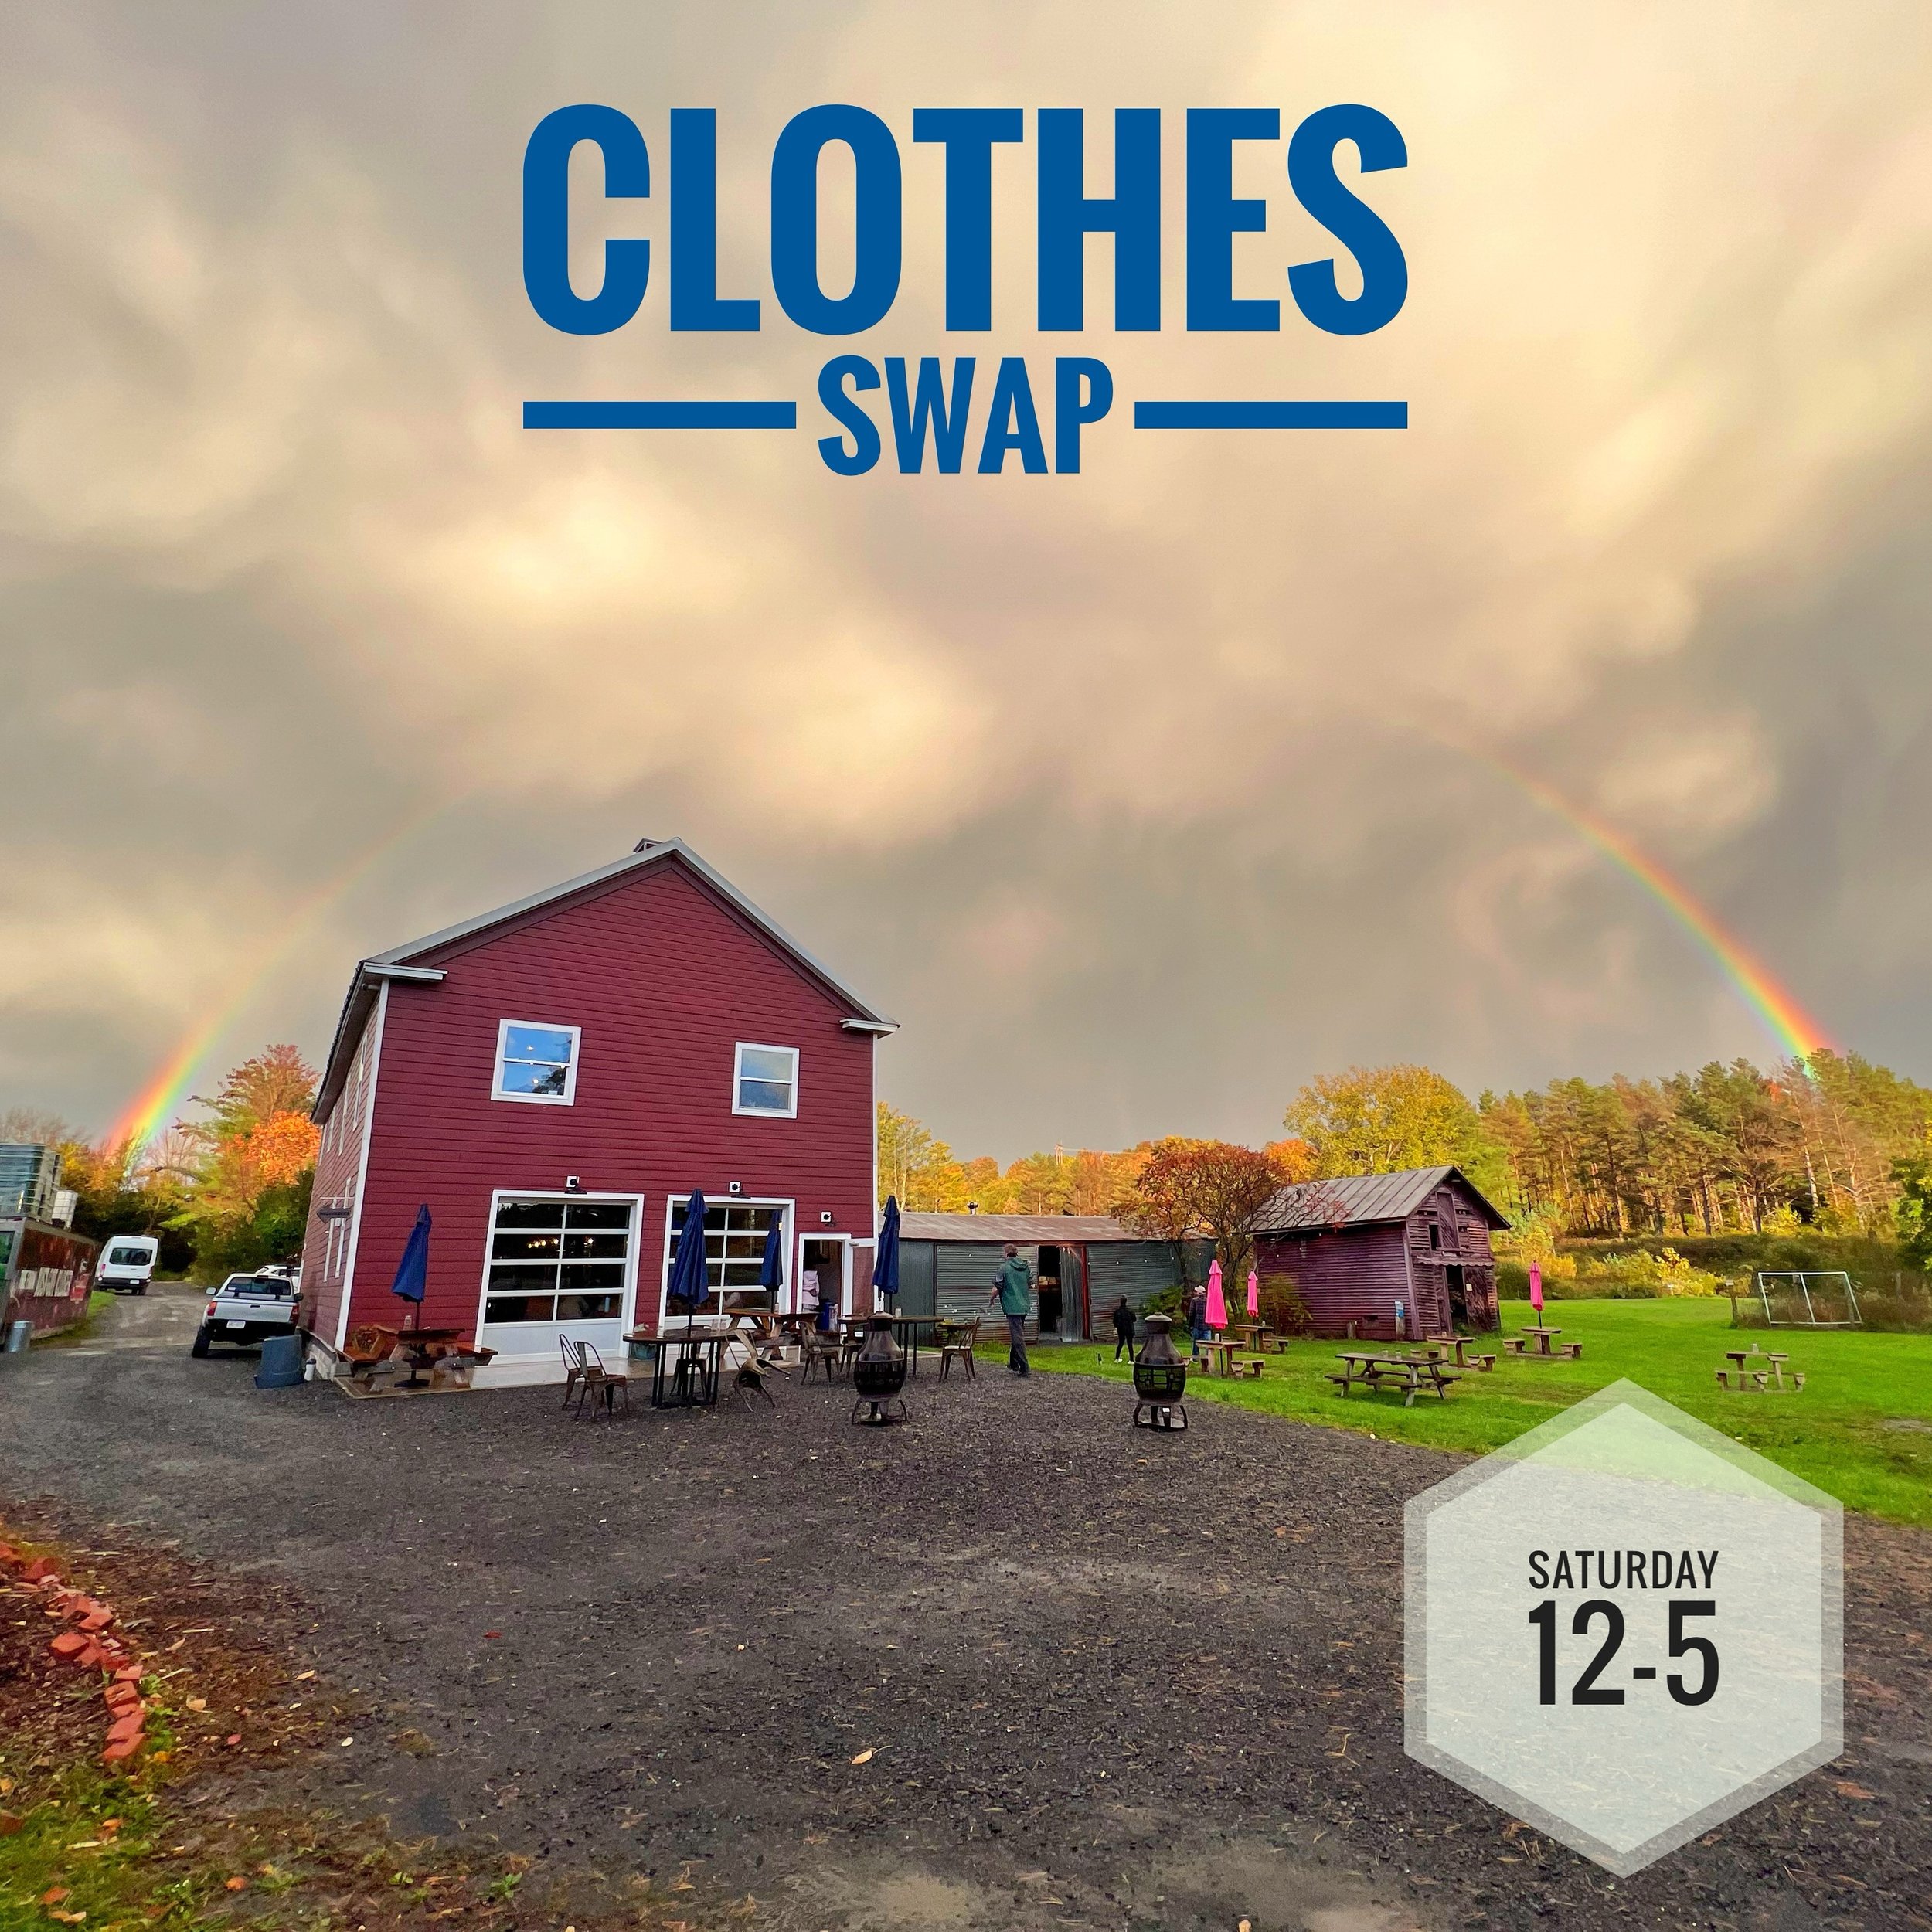 Ready to give your wardrobe a sustainable refresh? Celebrate Earth Day with us at Wayward Lane during our inaugural Clothes Swap event this Saturday from 12 to 5 PM!

It&rsquo;s time to declutter those closets and pass along those pieces you no longe